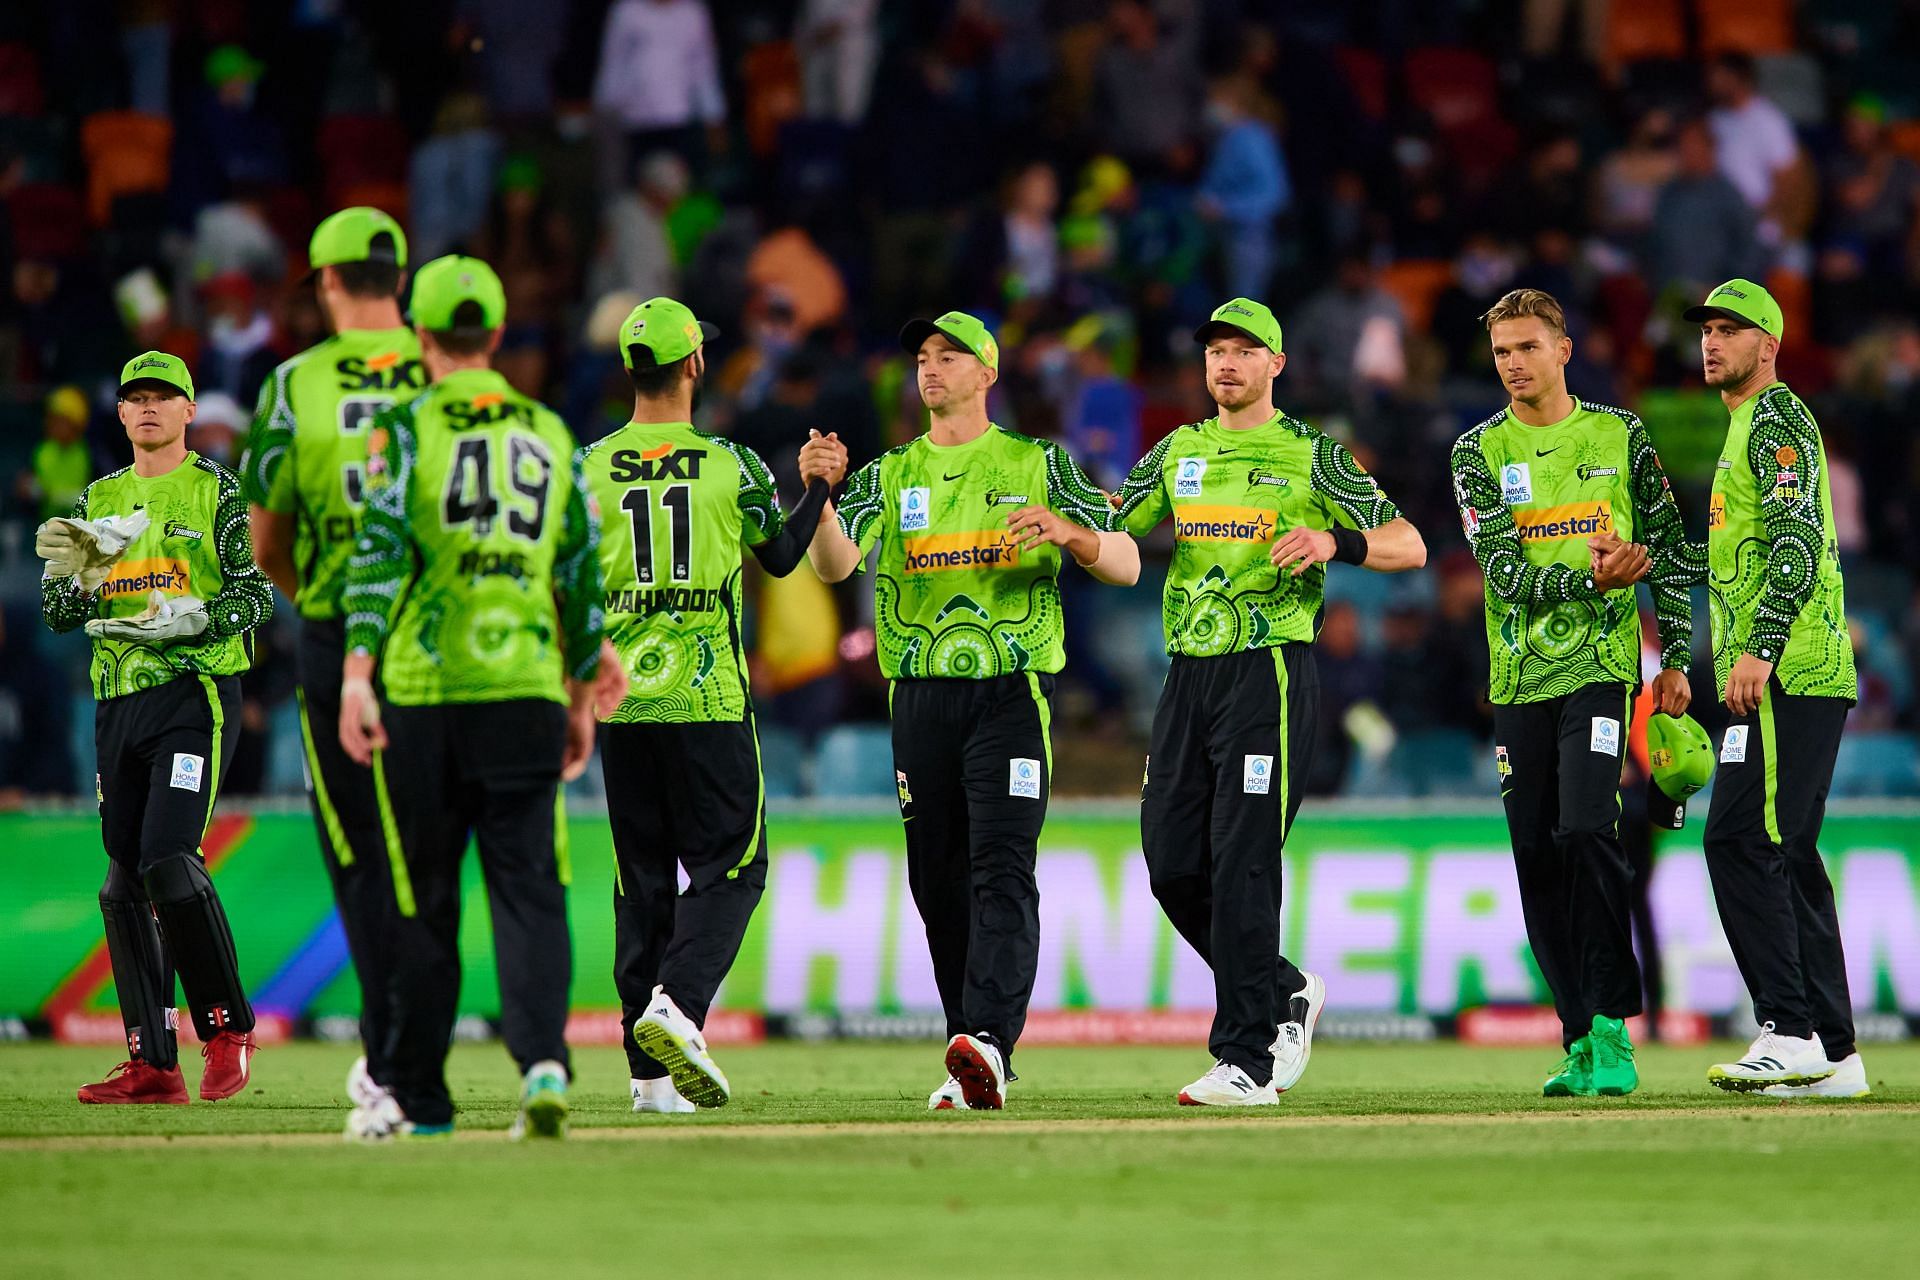 The Sydney Thunder will look to snare their fourth win against the Strikers.